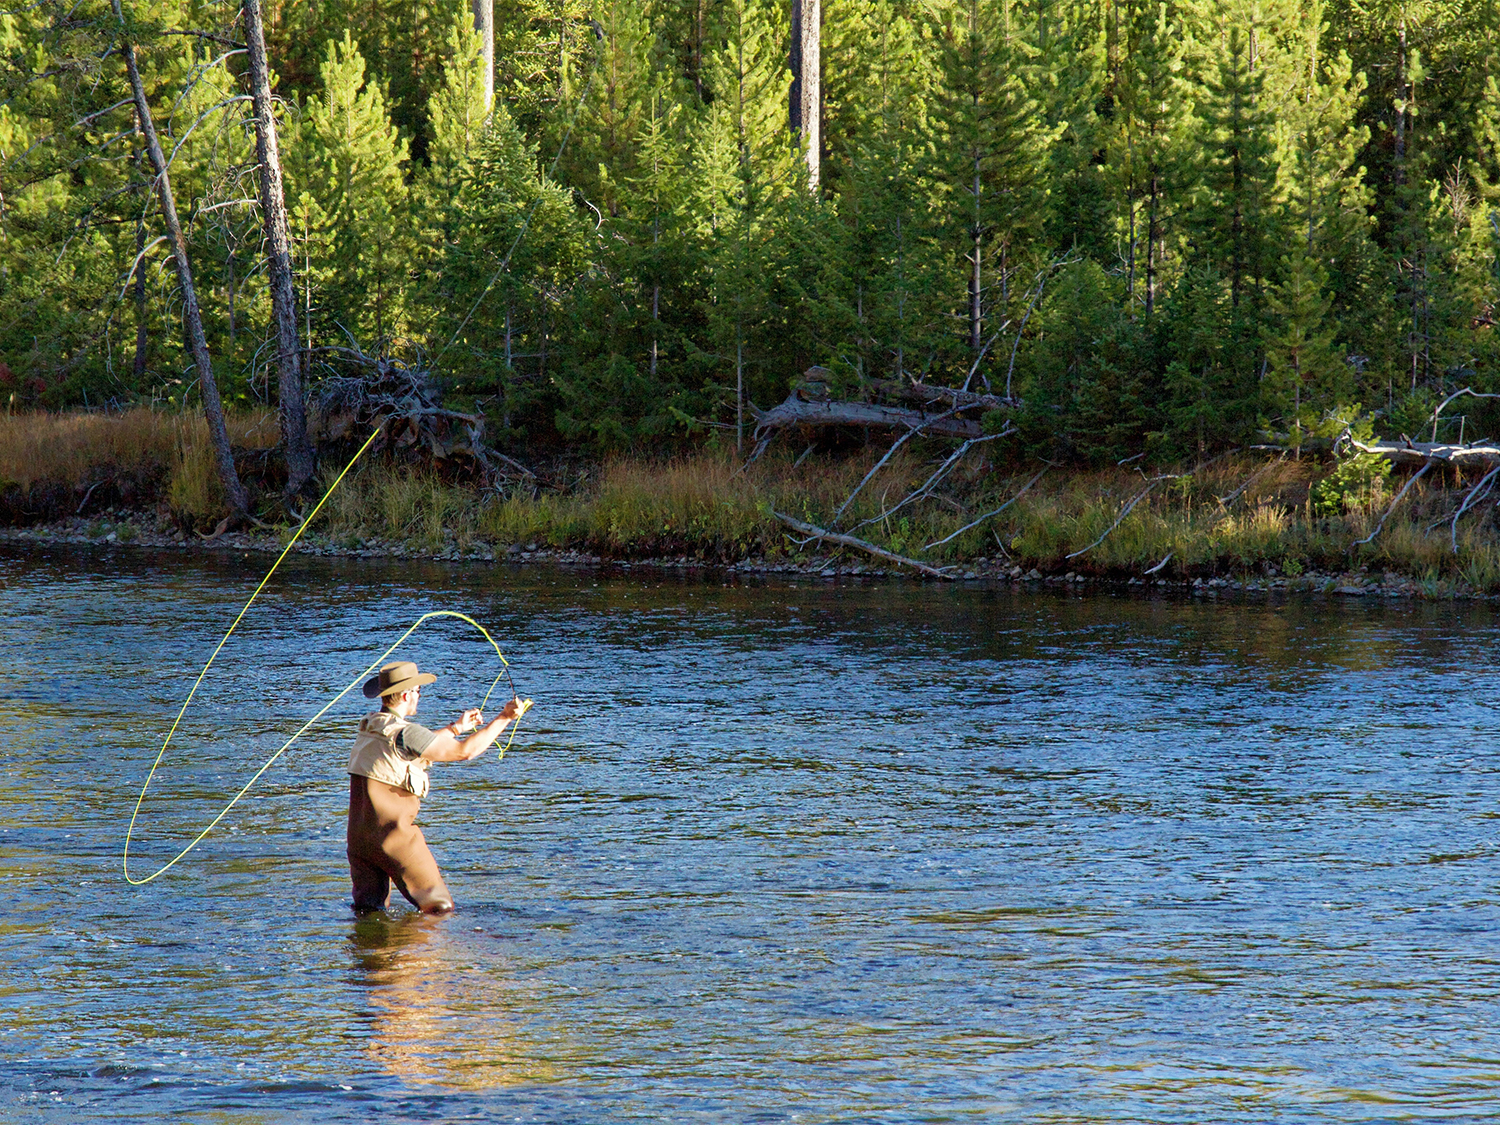 An angler wades through a river while flyfishing, wearing the best fishing vest.